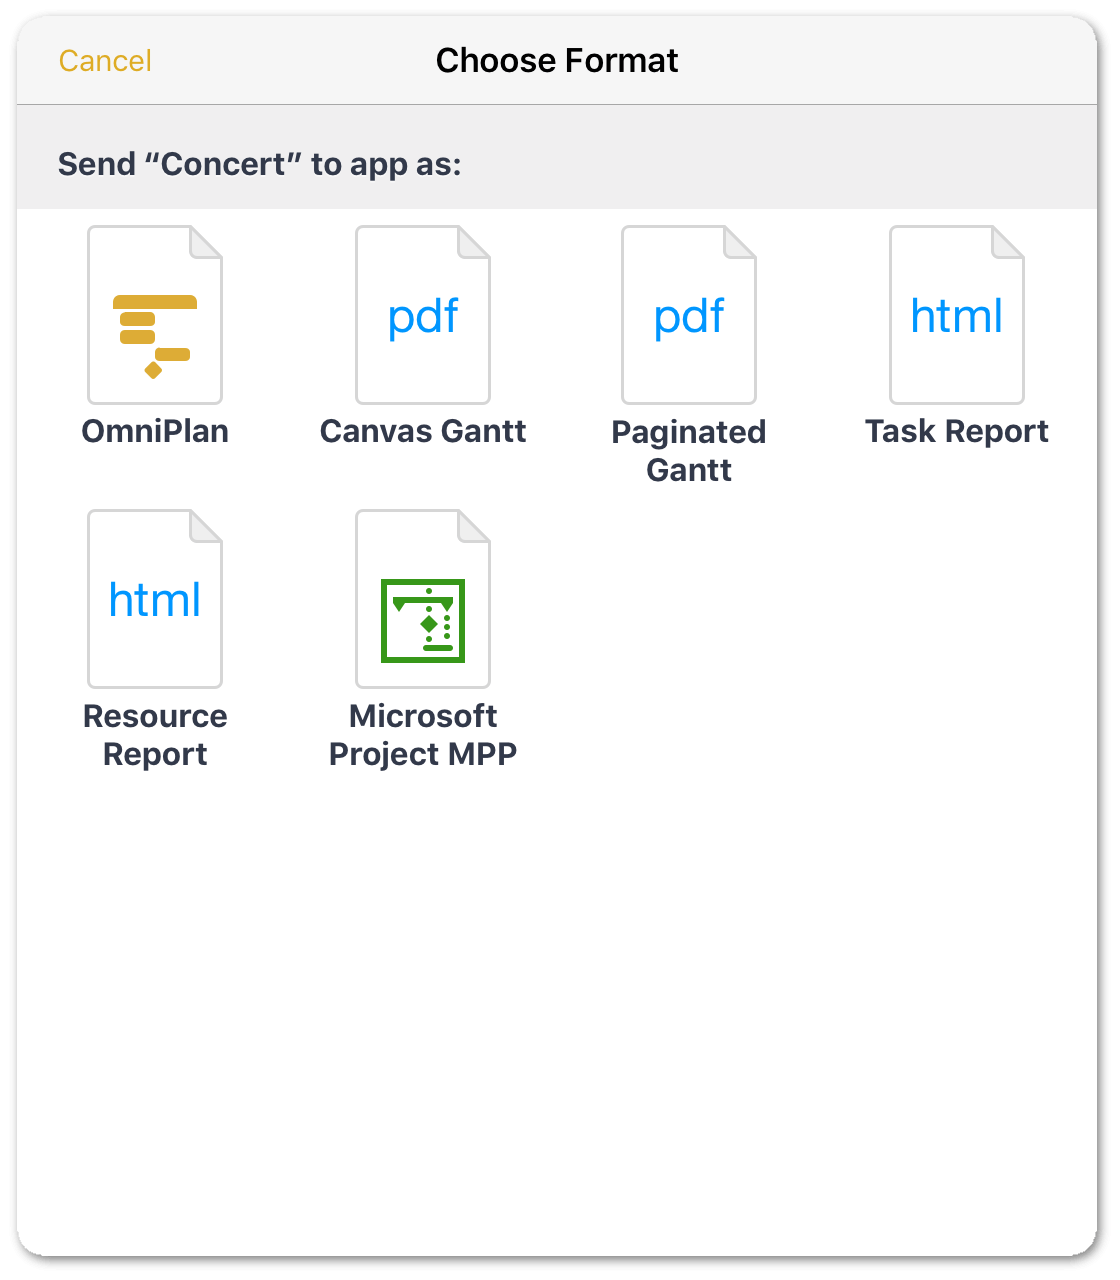 File format options for Send via Email.